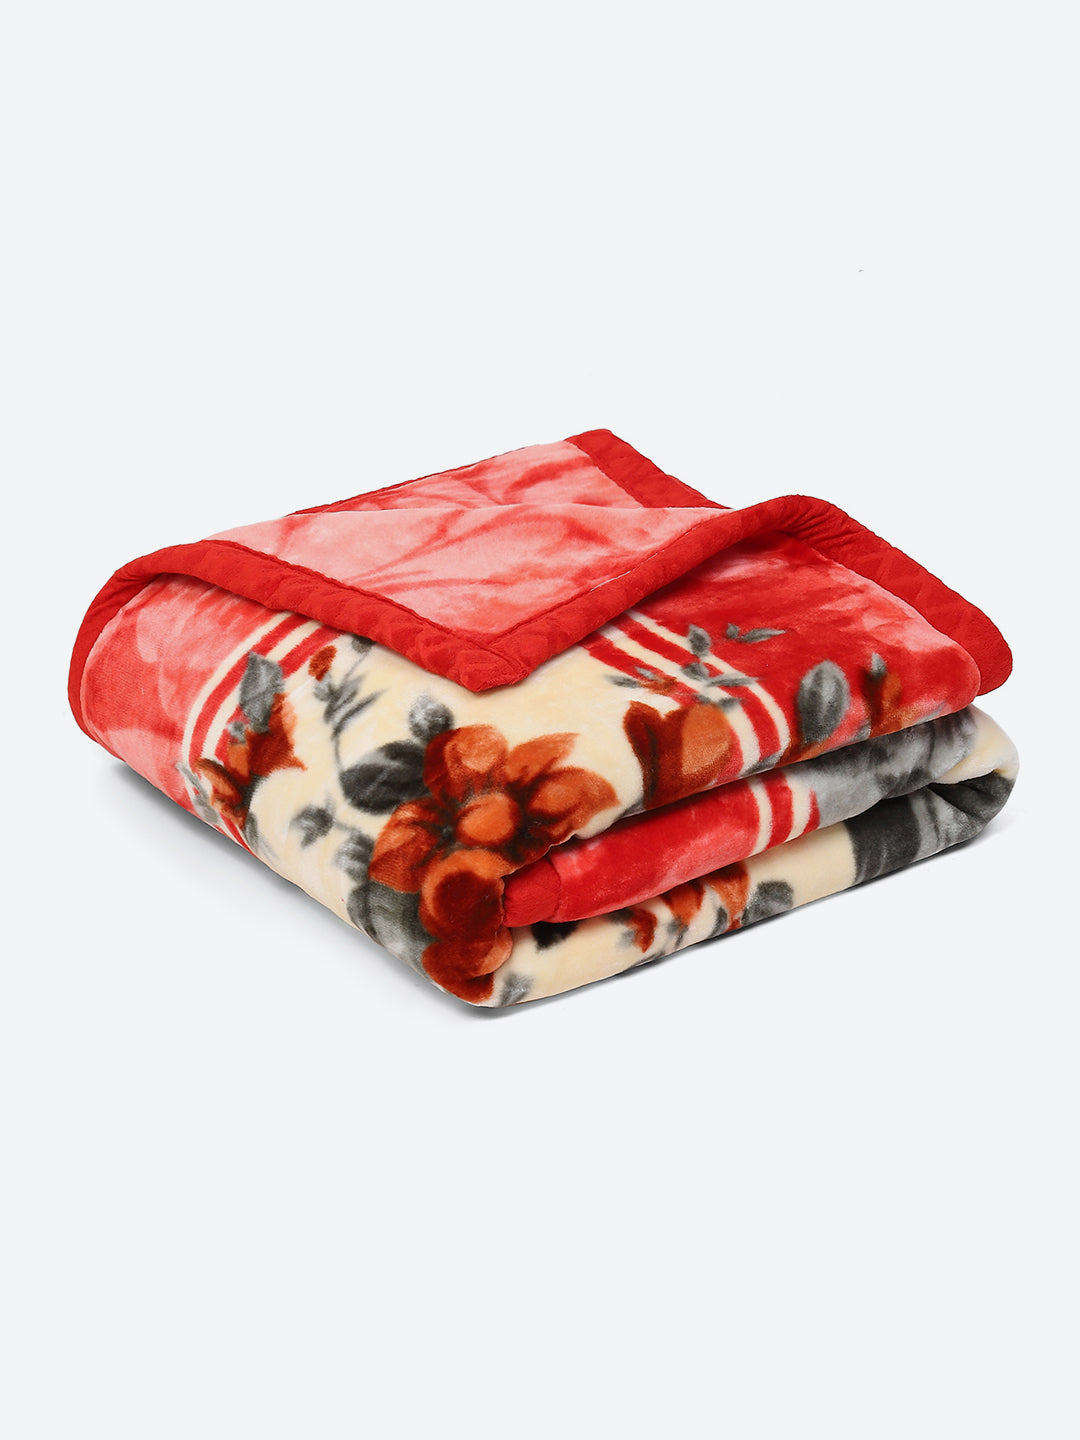 Printed Single Bed Blanket for Heavy Winter -1 Ply